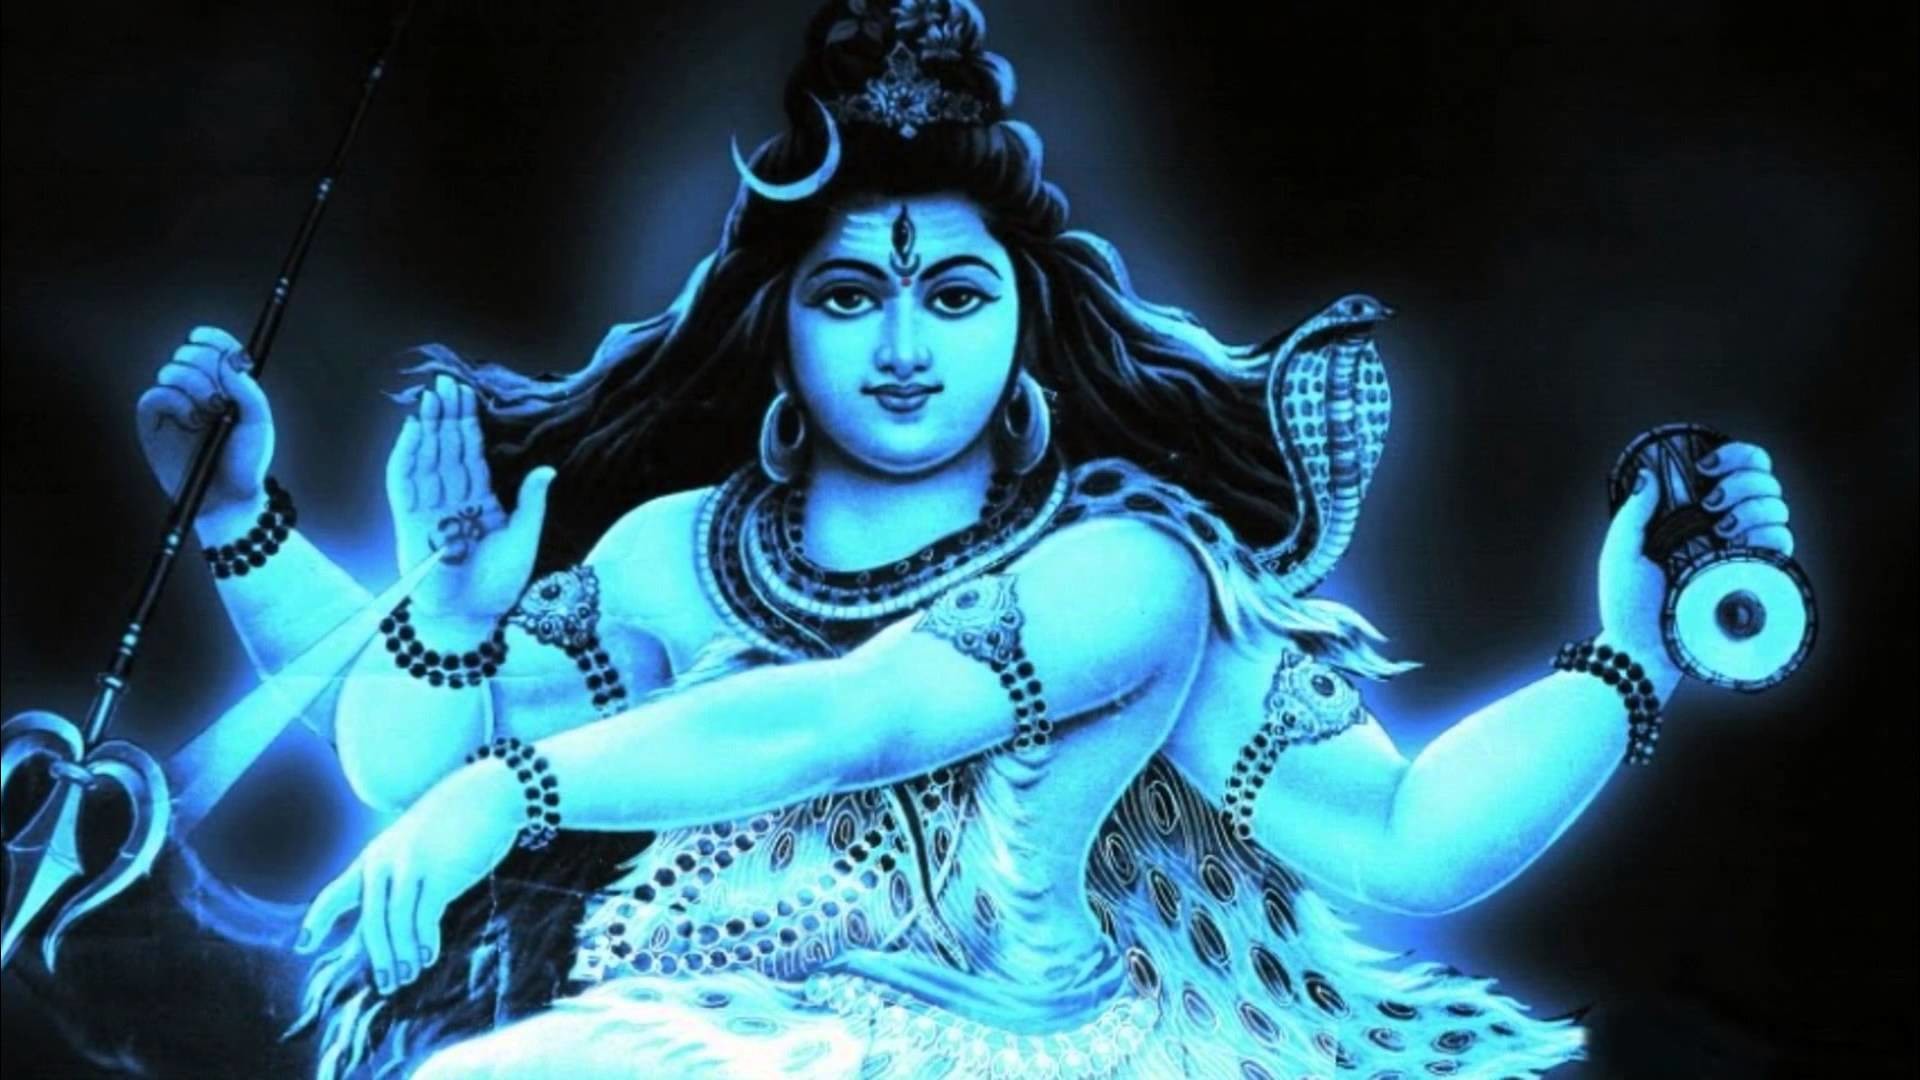 1920x1080 My Lord Shiva Live Wallpaper for (Android) Free Download on MoboMarket